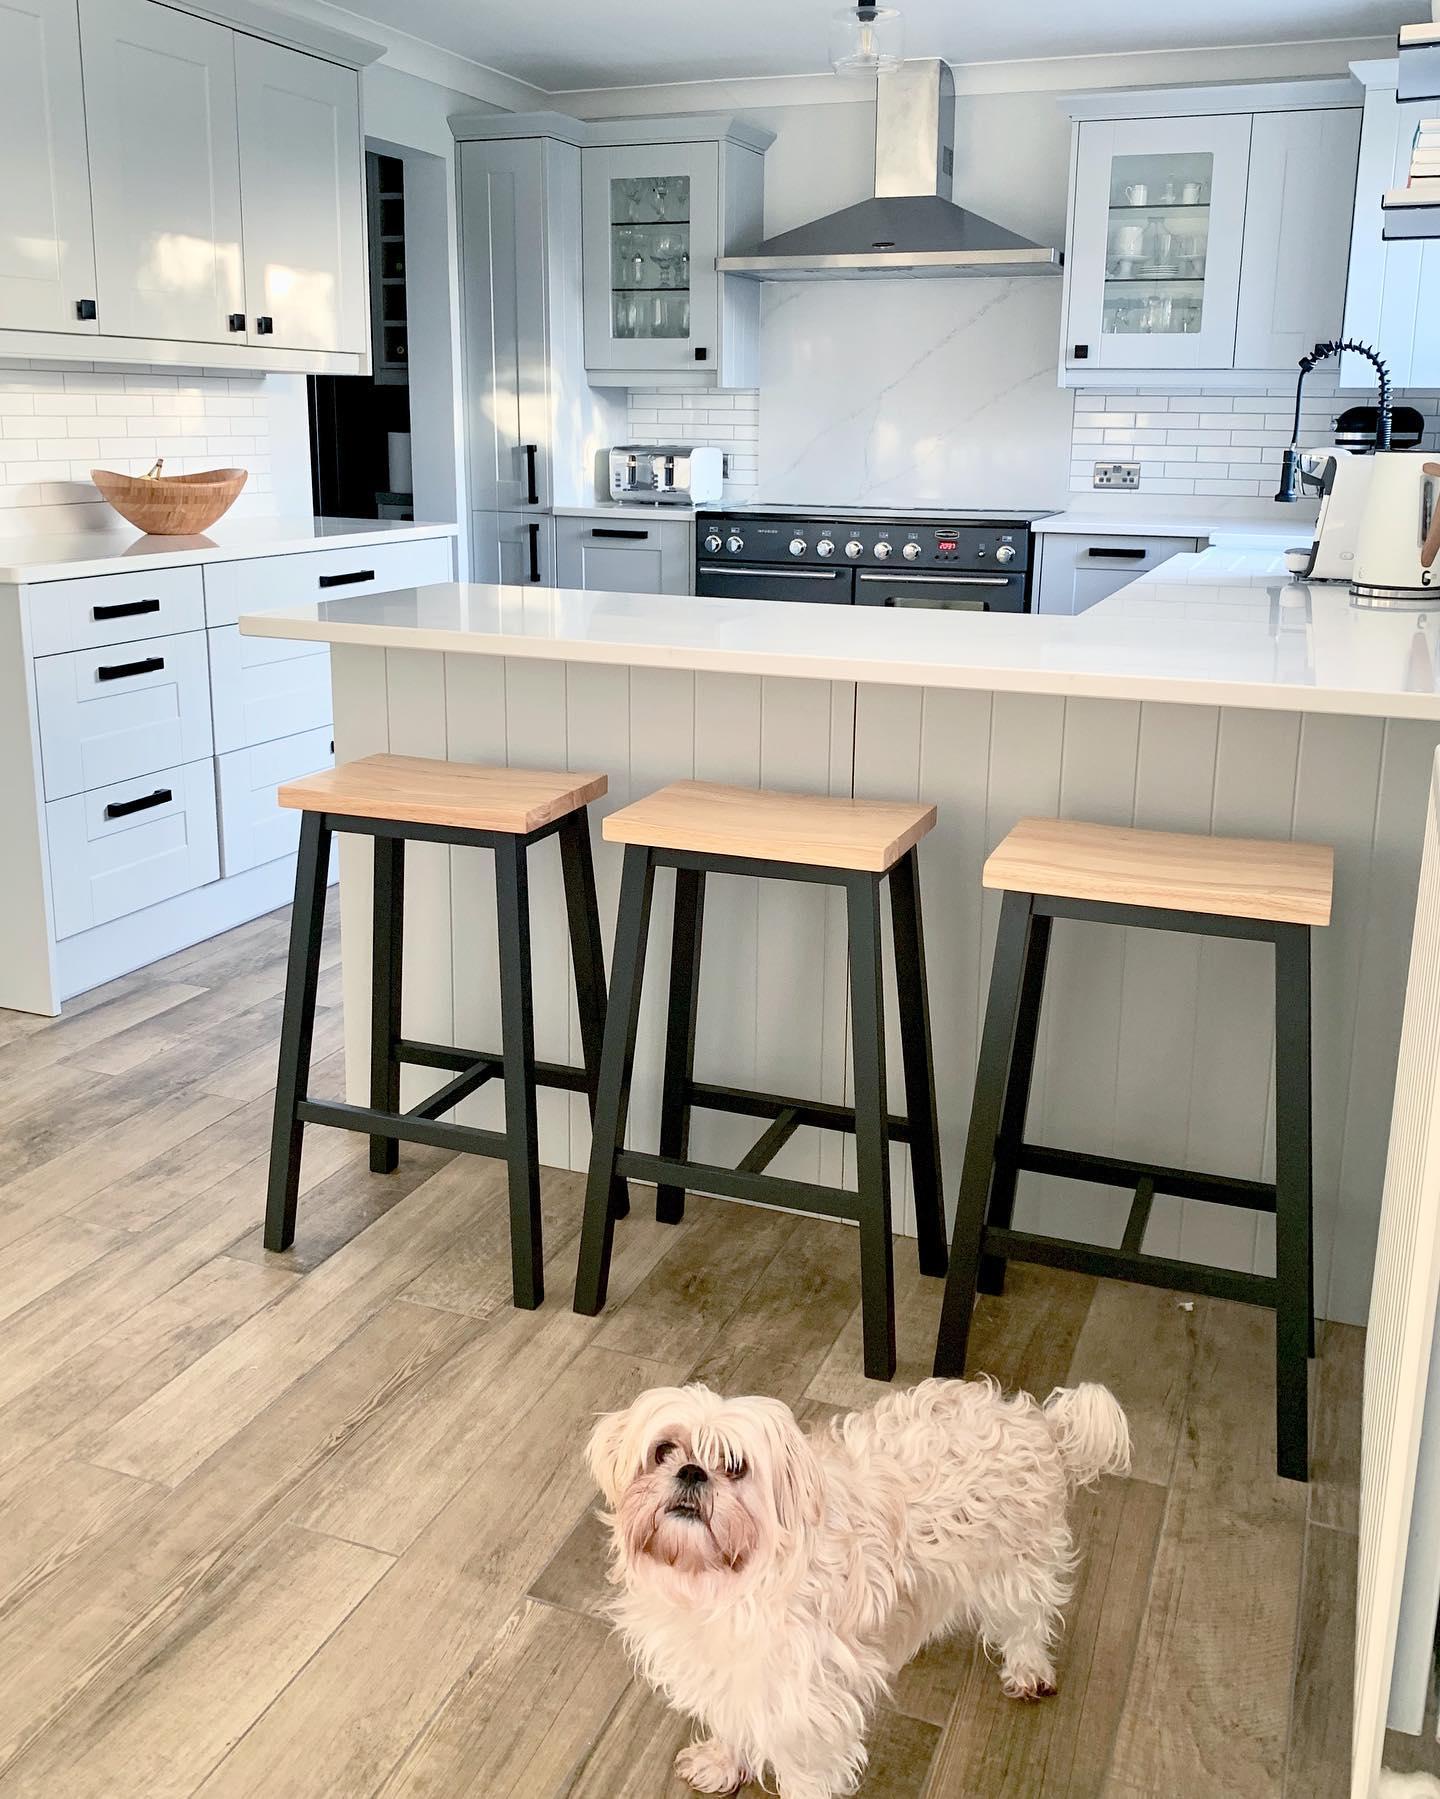 Wren Kitchens On Twitter Happy Saturday Shaker Ermine Units In Fresh And Light Tones Form A Calm And Cosy Feel To The Kitchen This Clean Design Is Warmed Up By The